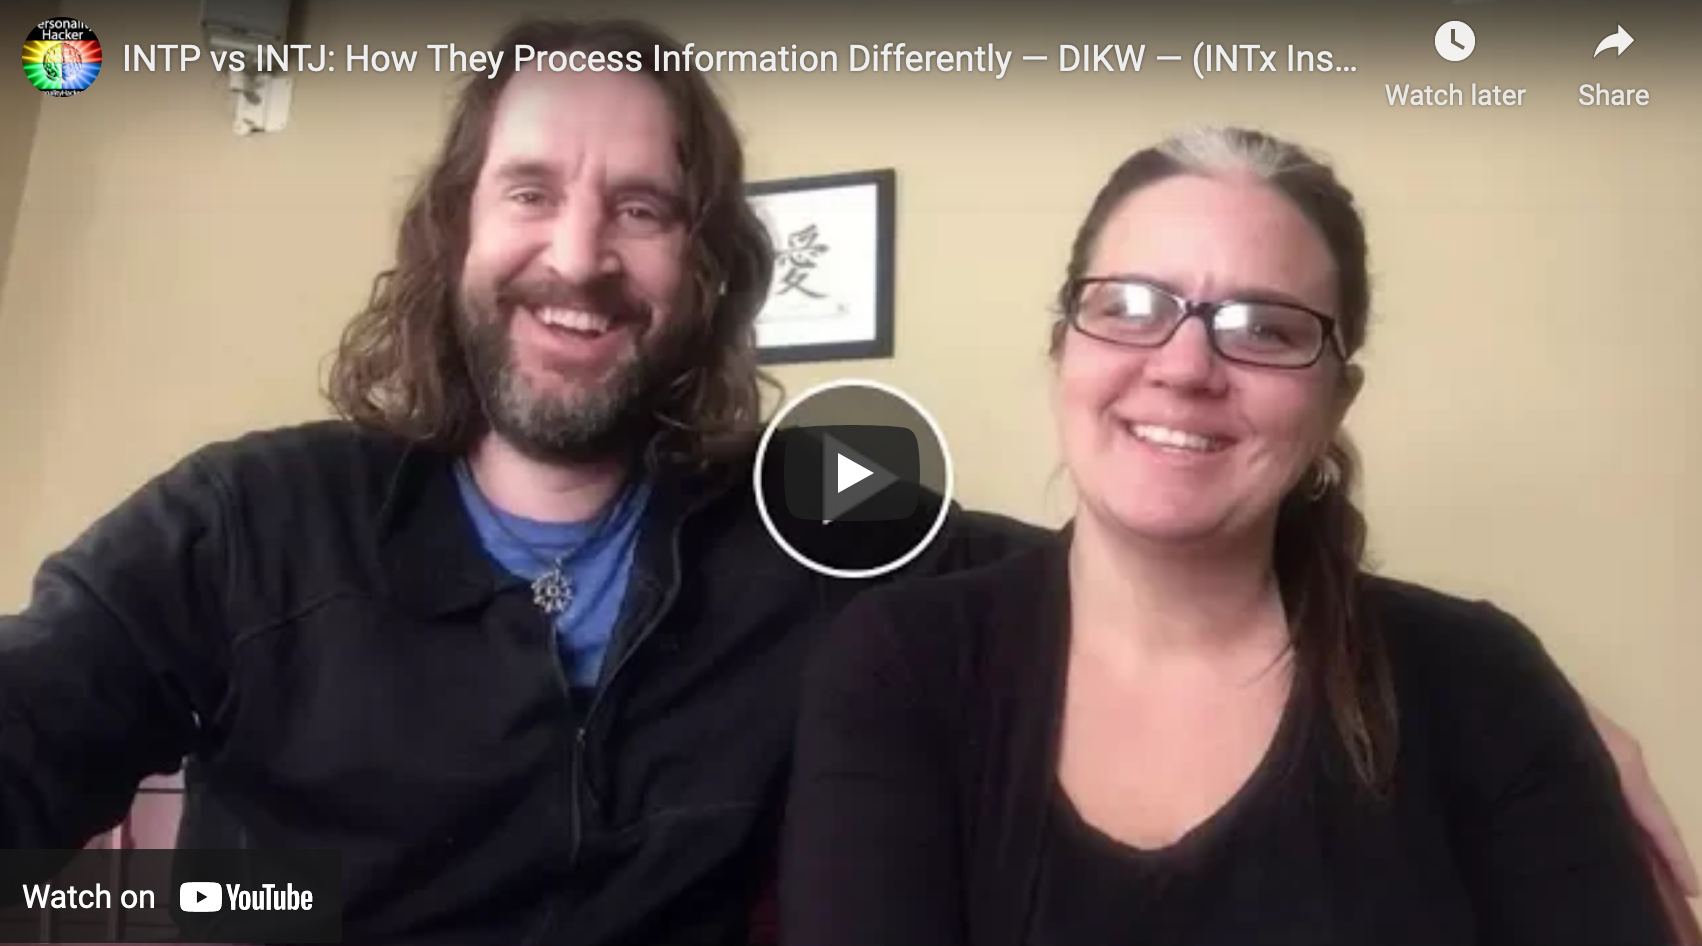 INTP vs INTJ: How They Process Information Differently — DIKW (INTx Insights)